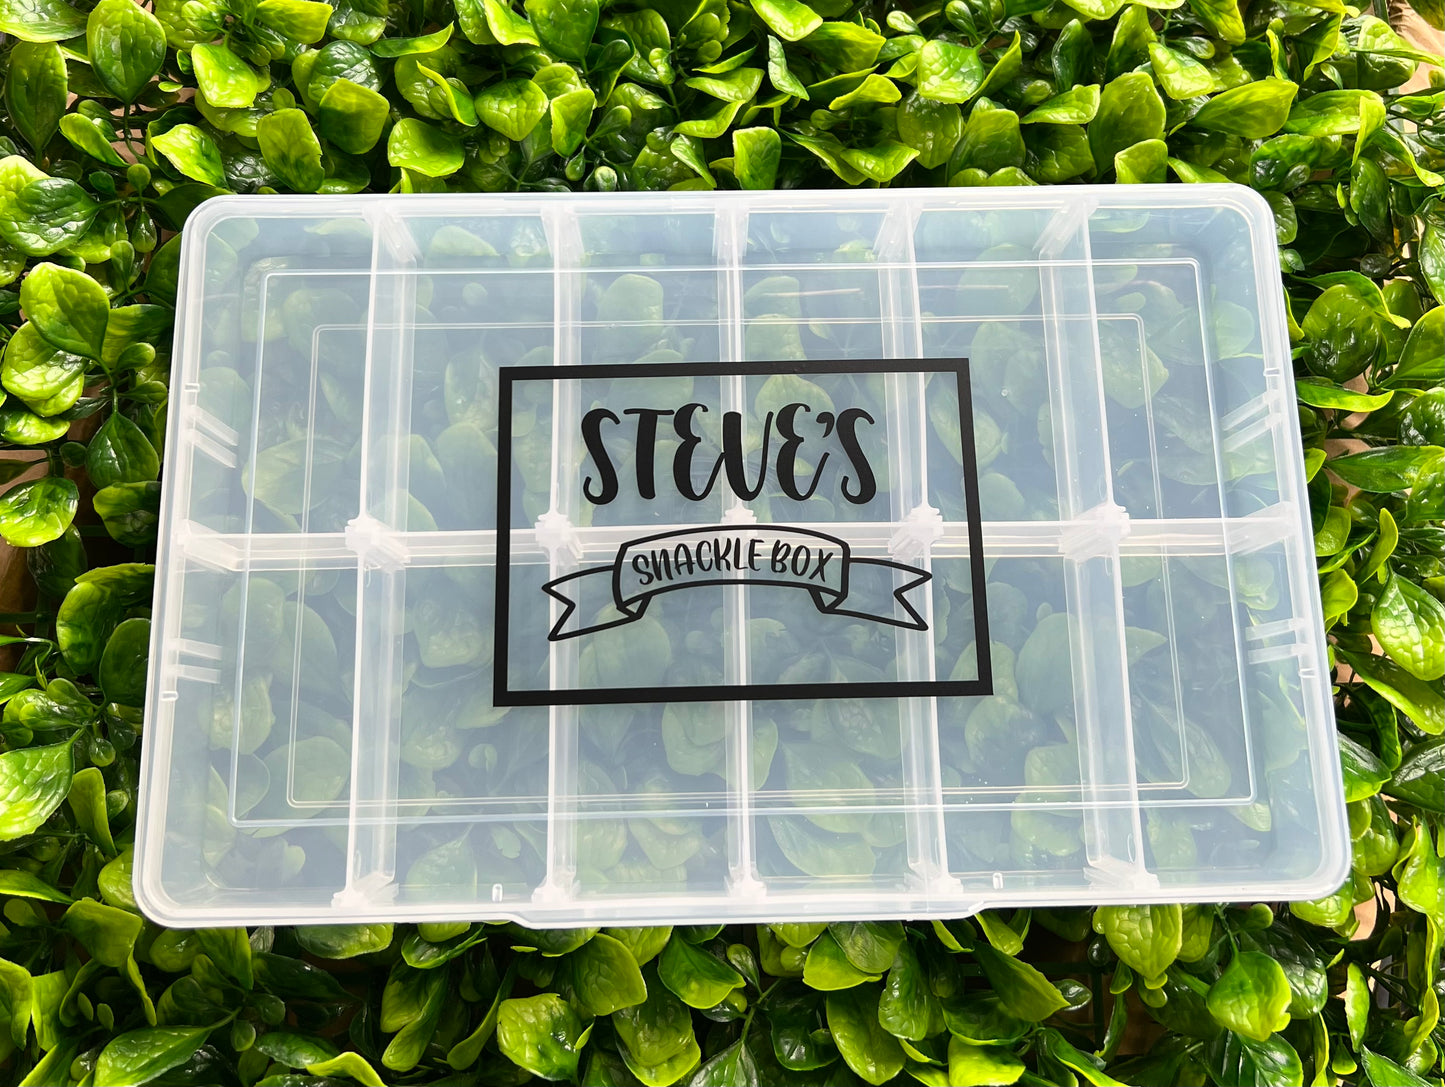 Snackle box decal